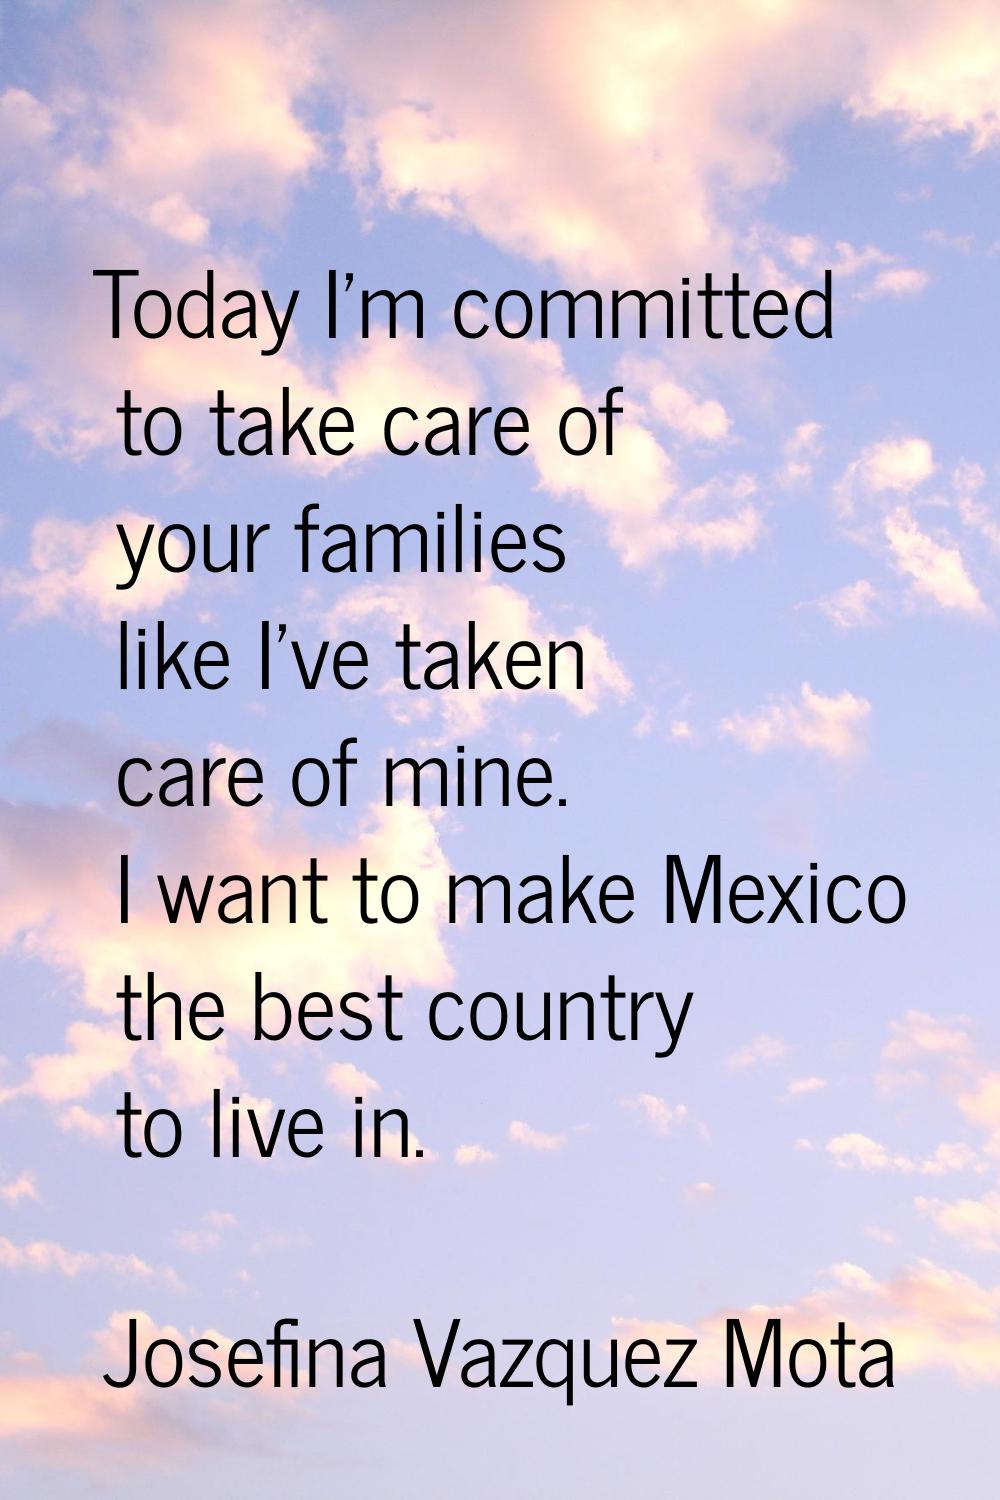 Today I'm committed to take care of your families like I've taken care of mine. I want to make Mexi